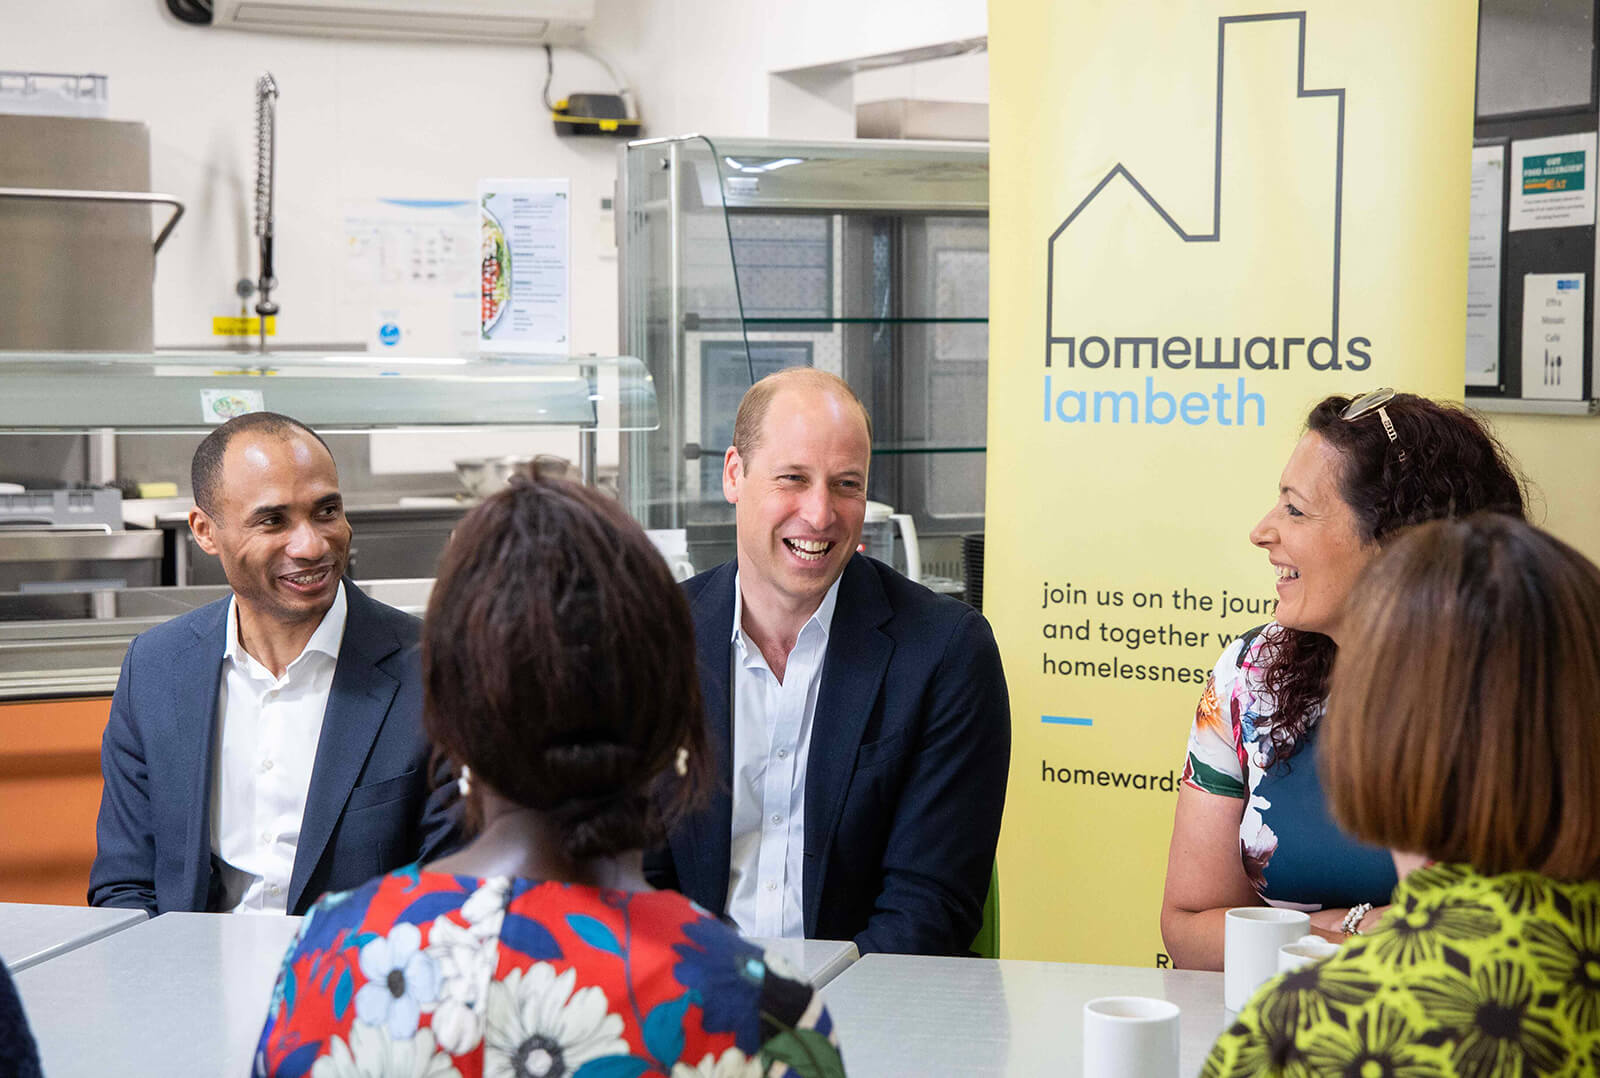 Photo of Prince William smiling with others at 'homewards lambeth'